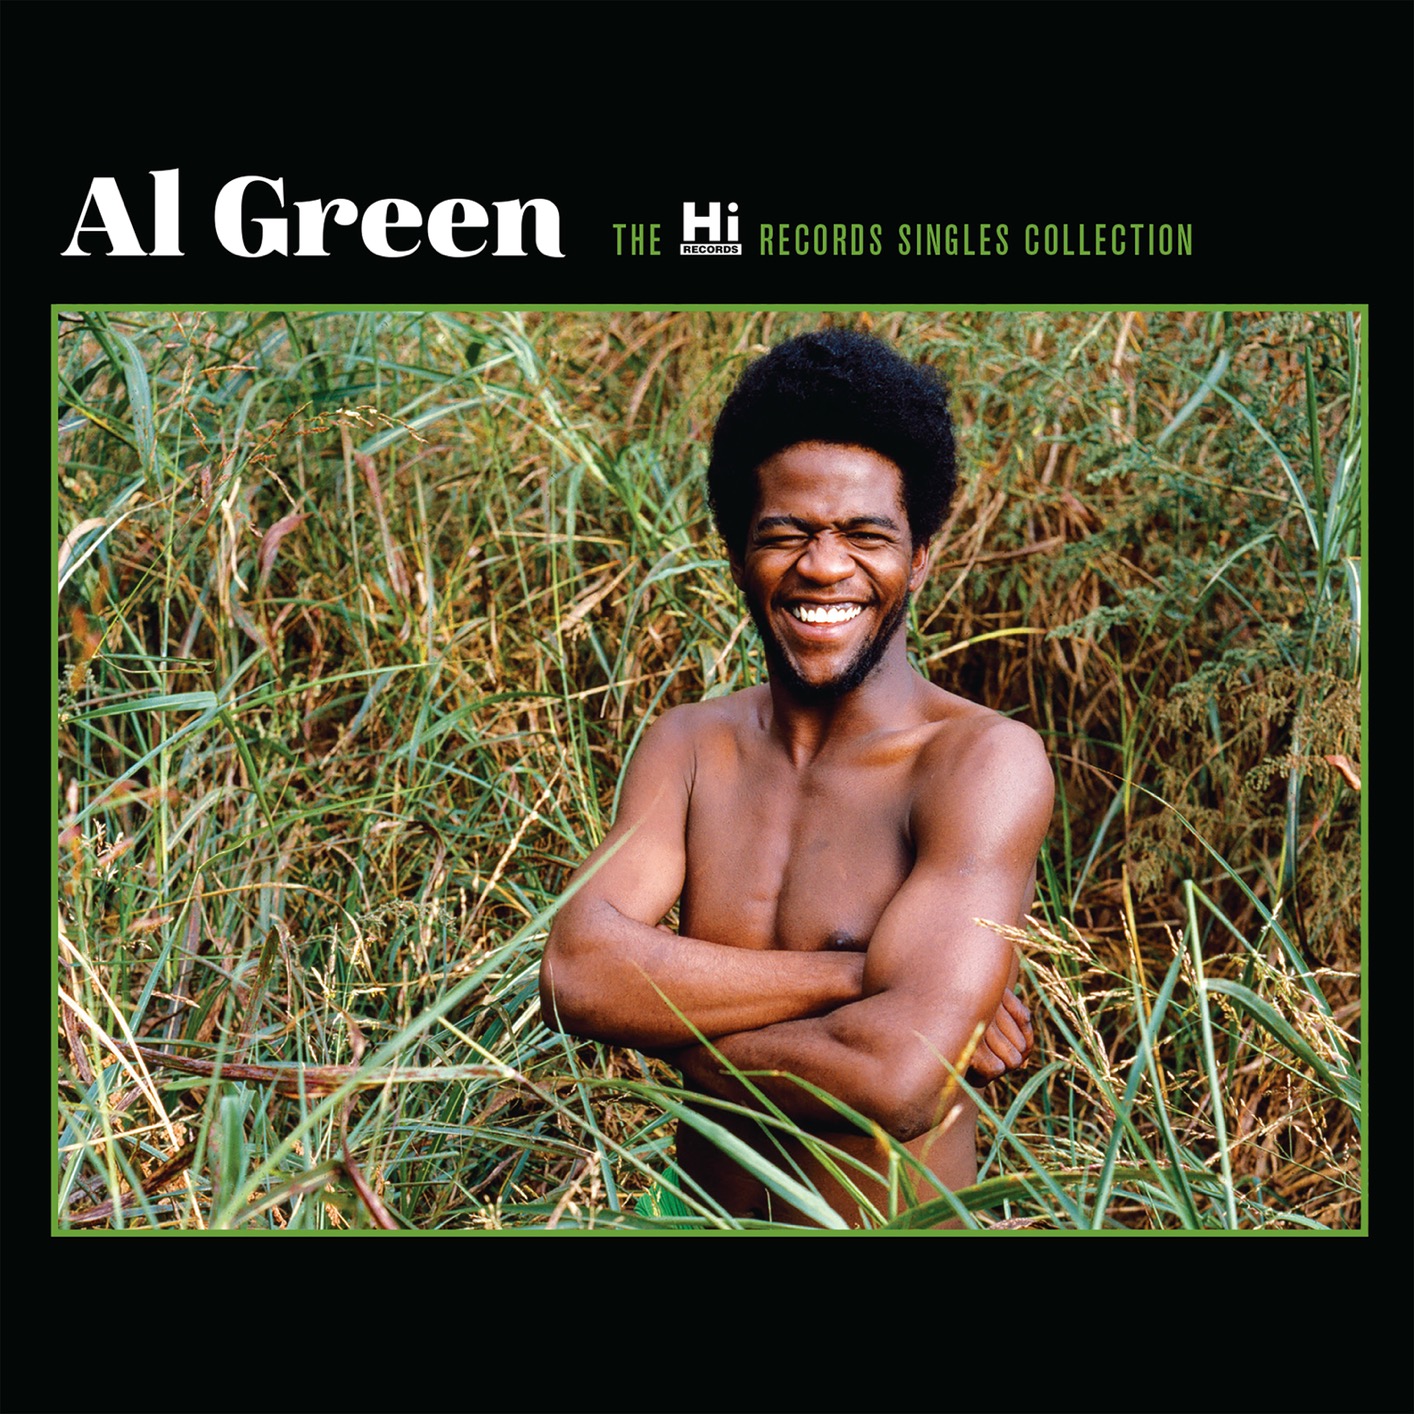 Al Green - The Hi Records Singles Collection (Remastered) (2018/2019) [FLAC 24bit/96kHz]